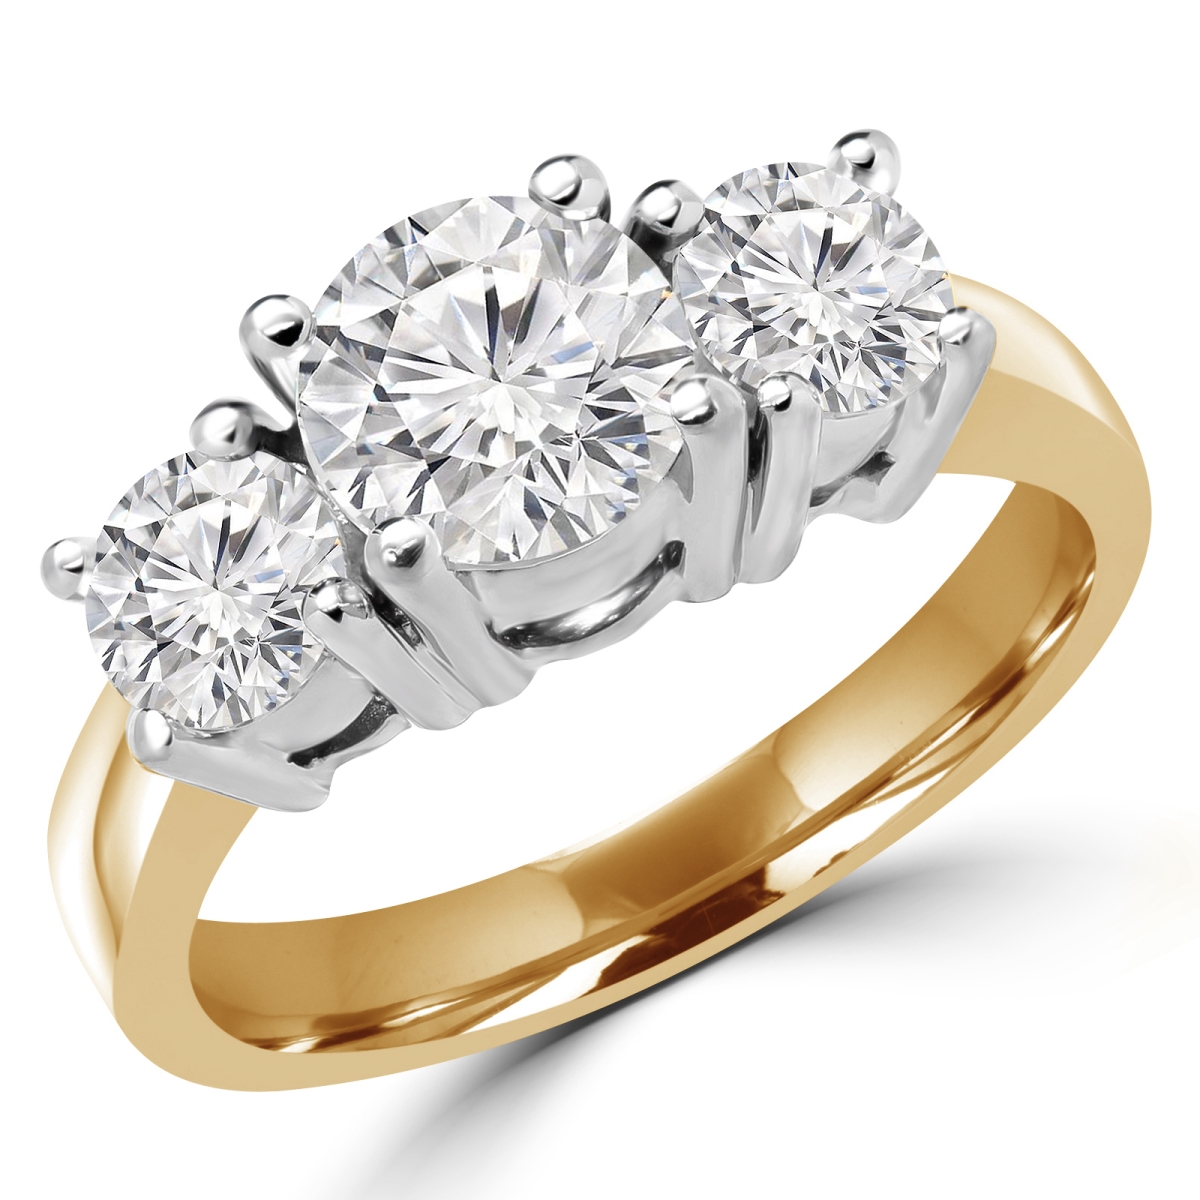 Picture of Majesty Diamonds MD170091-3.75 1.1 CTW Round Diamond Three-Stone Engagement Ring in 14K Yellow Gold - Size 3.75